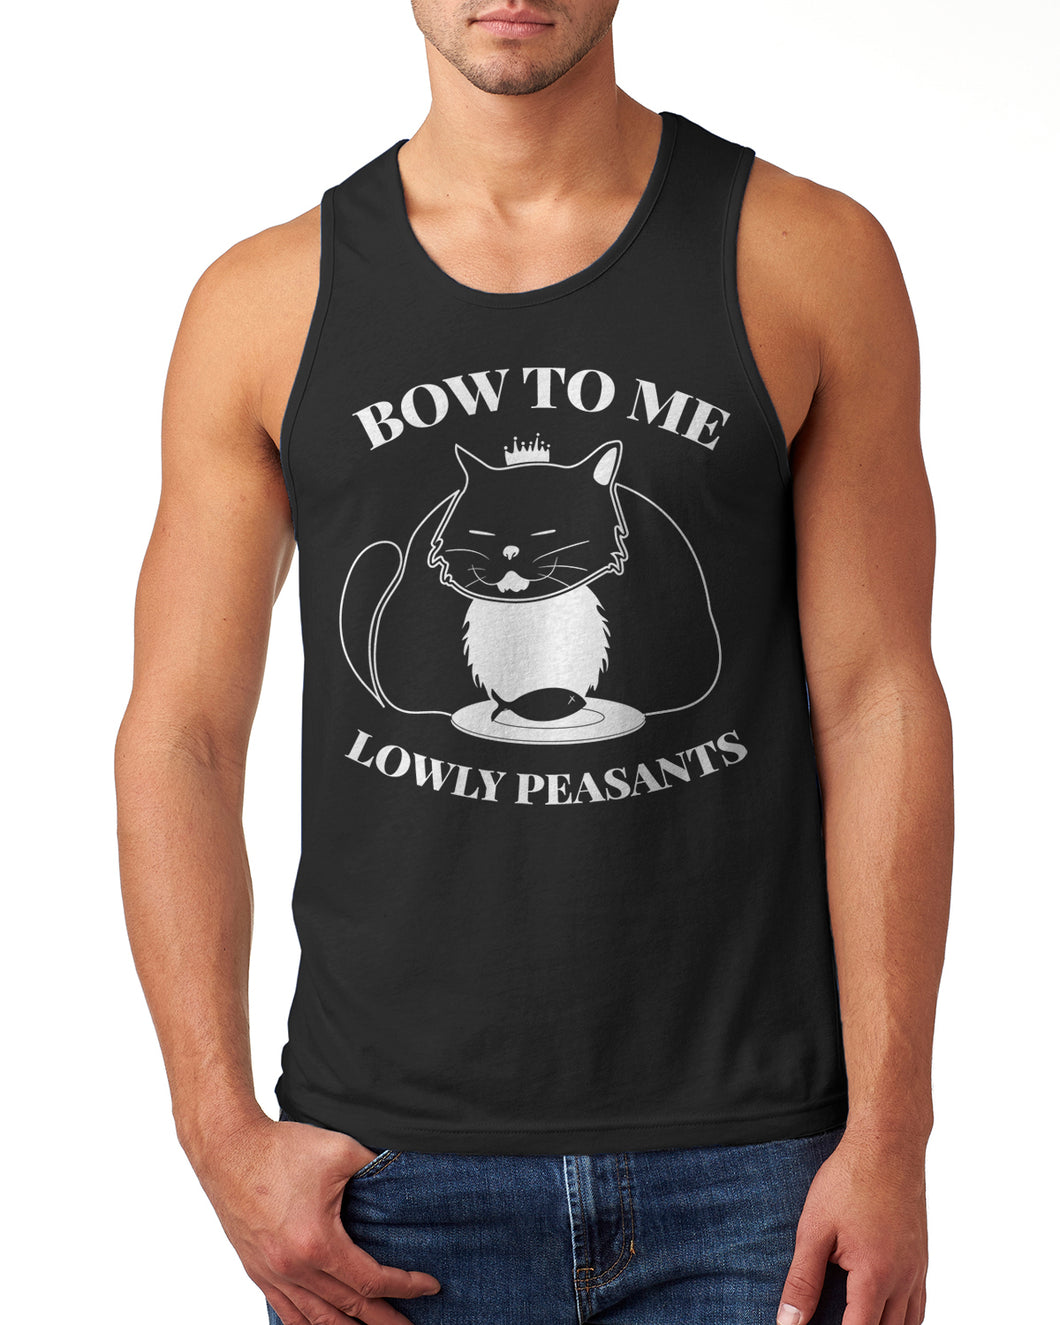 Bow To Me Lowly Peasants Cat Lover Men's Tank Top